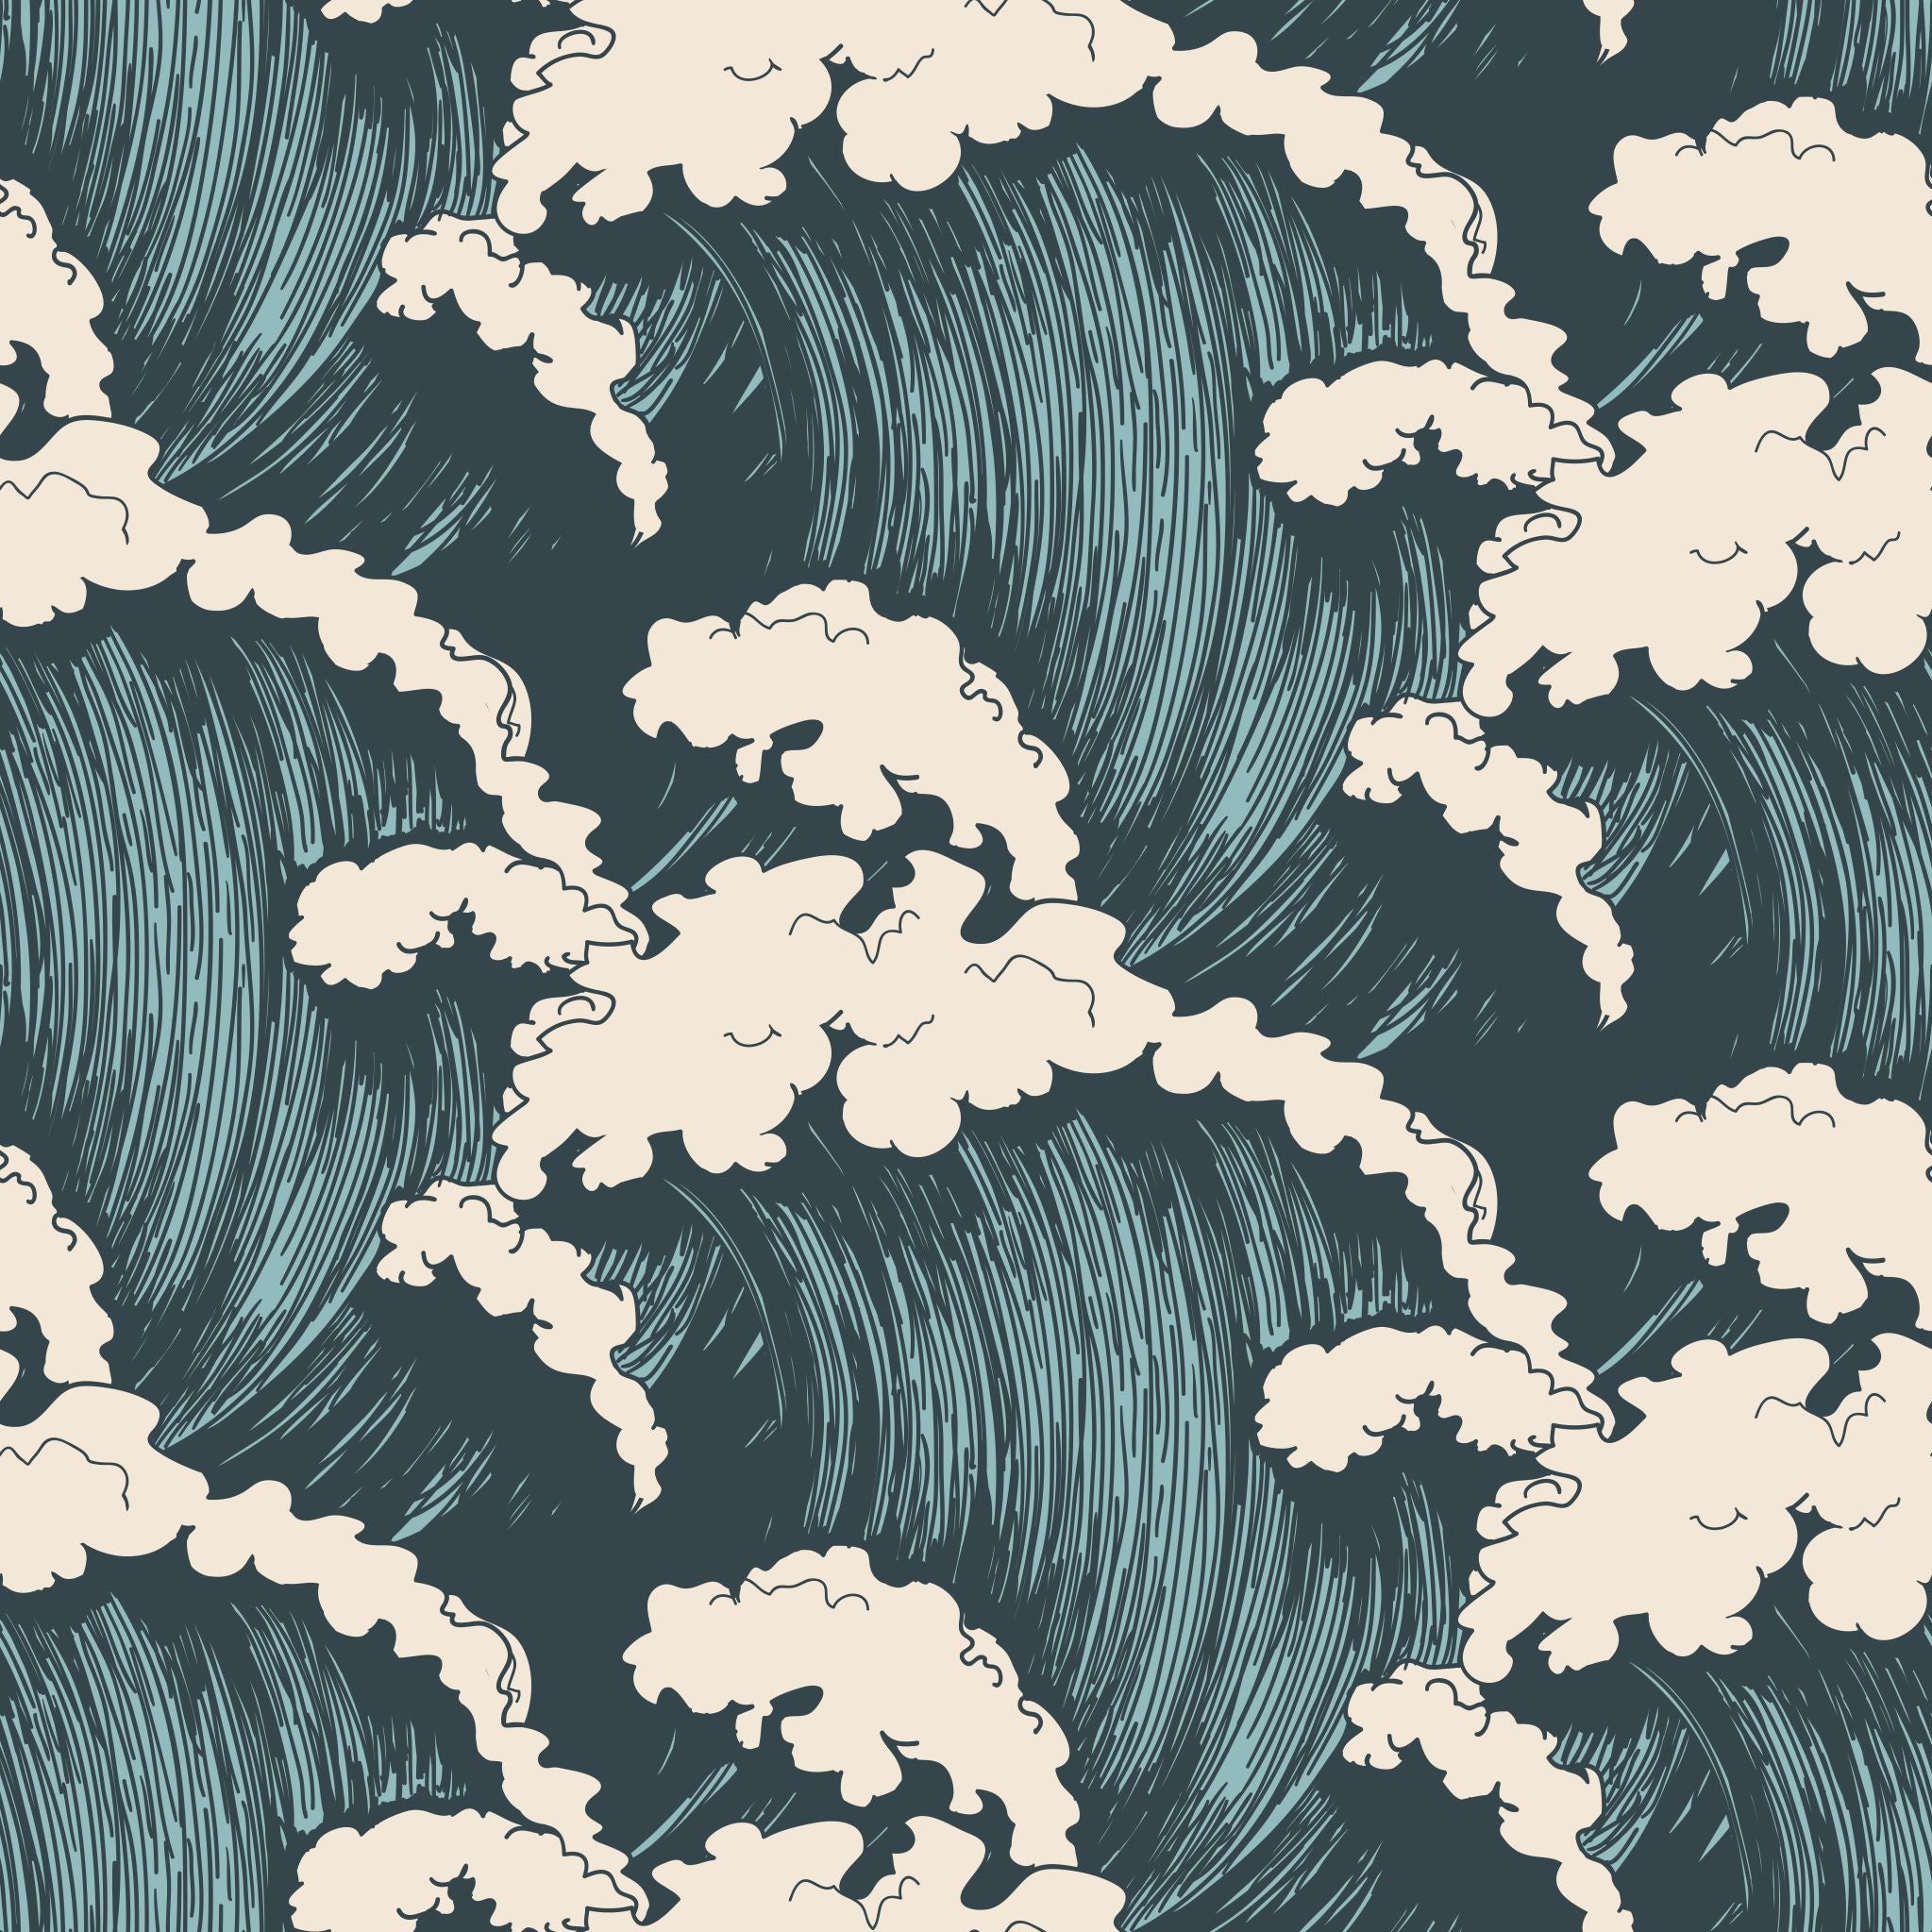 "Maverick Wallpaper by Wall Blush with playful clouds pattern in a modern home office setting."